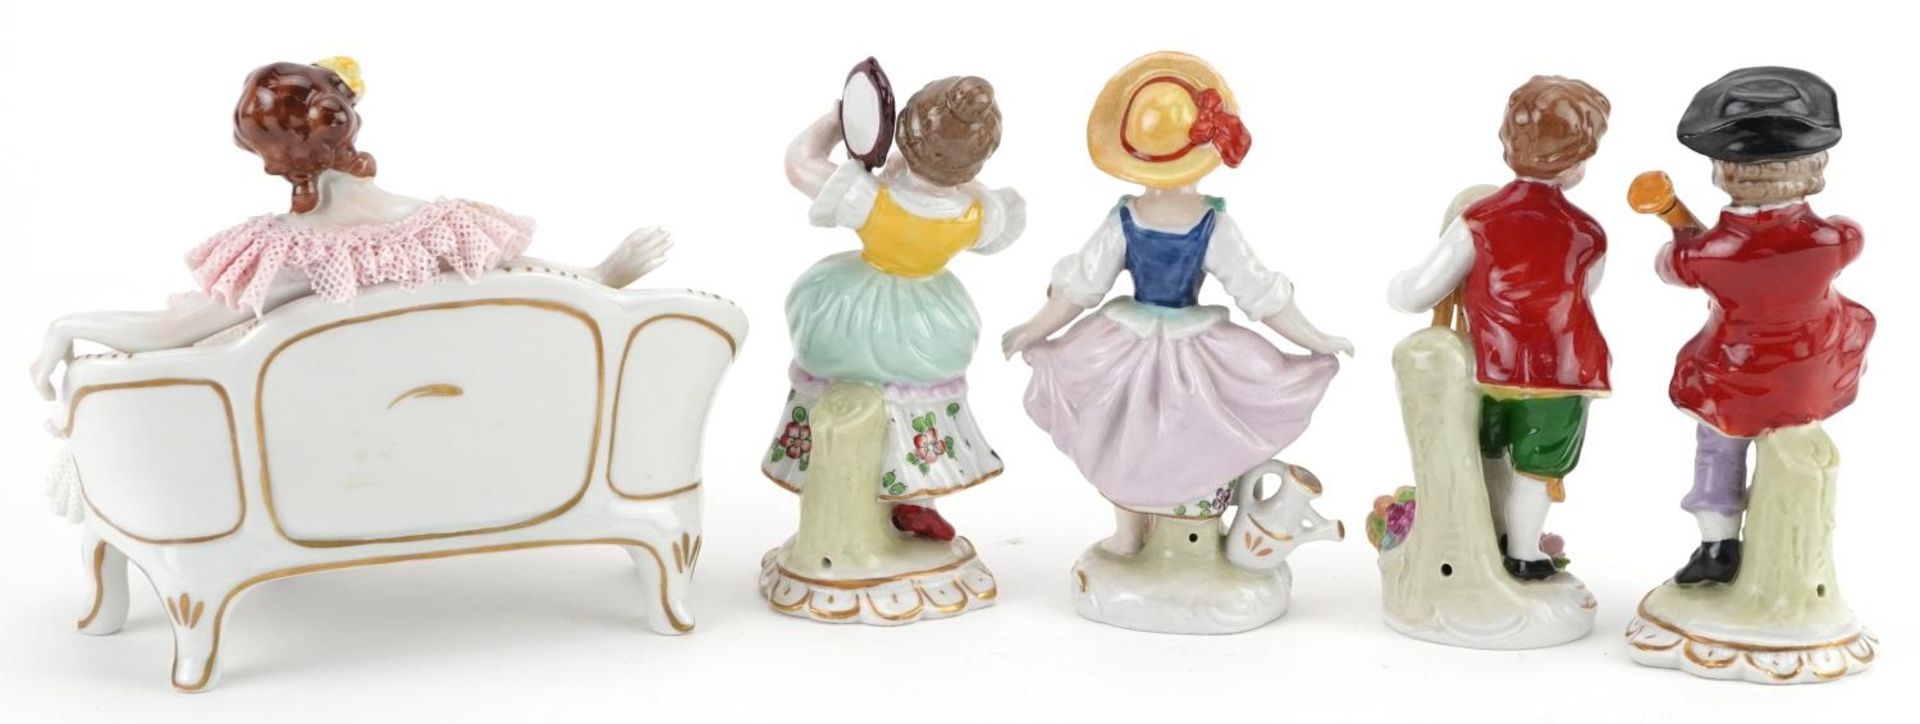 German porcelain comprising four Dresden figurines and a lace figurine in the form of a female on - Bild 4 aus 5